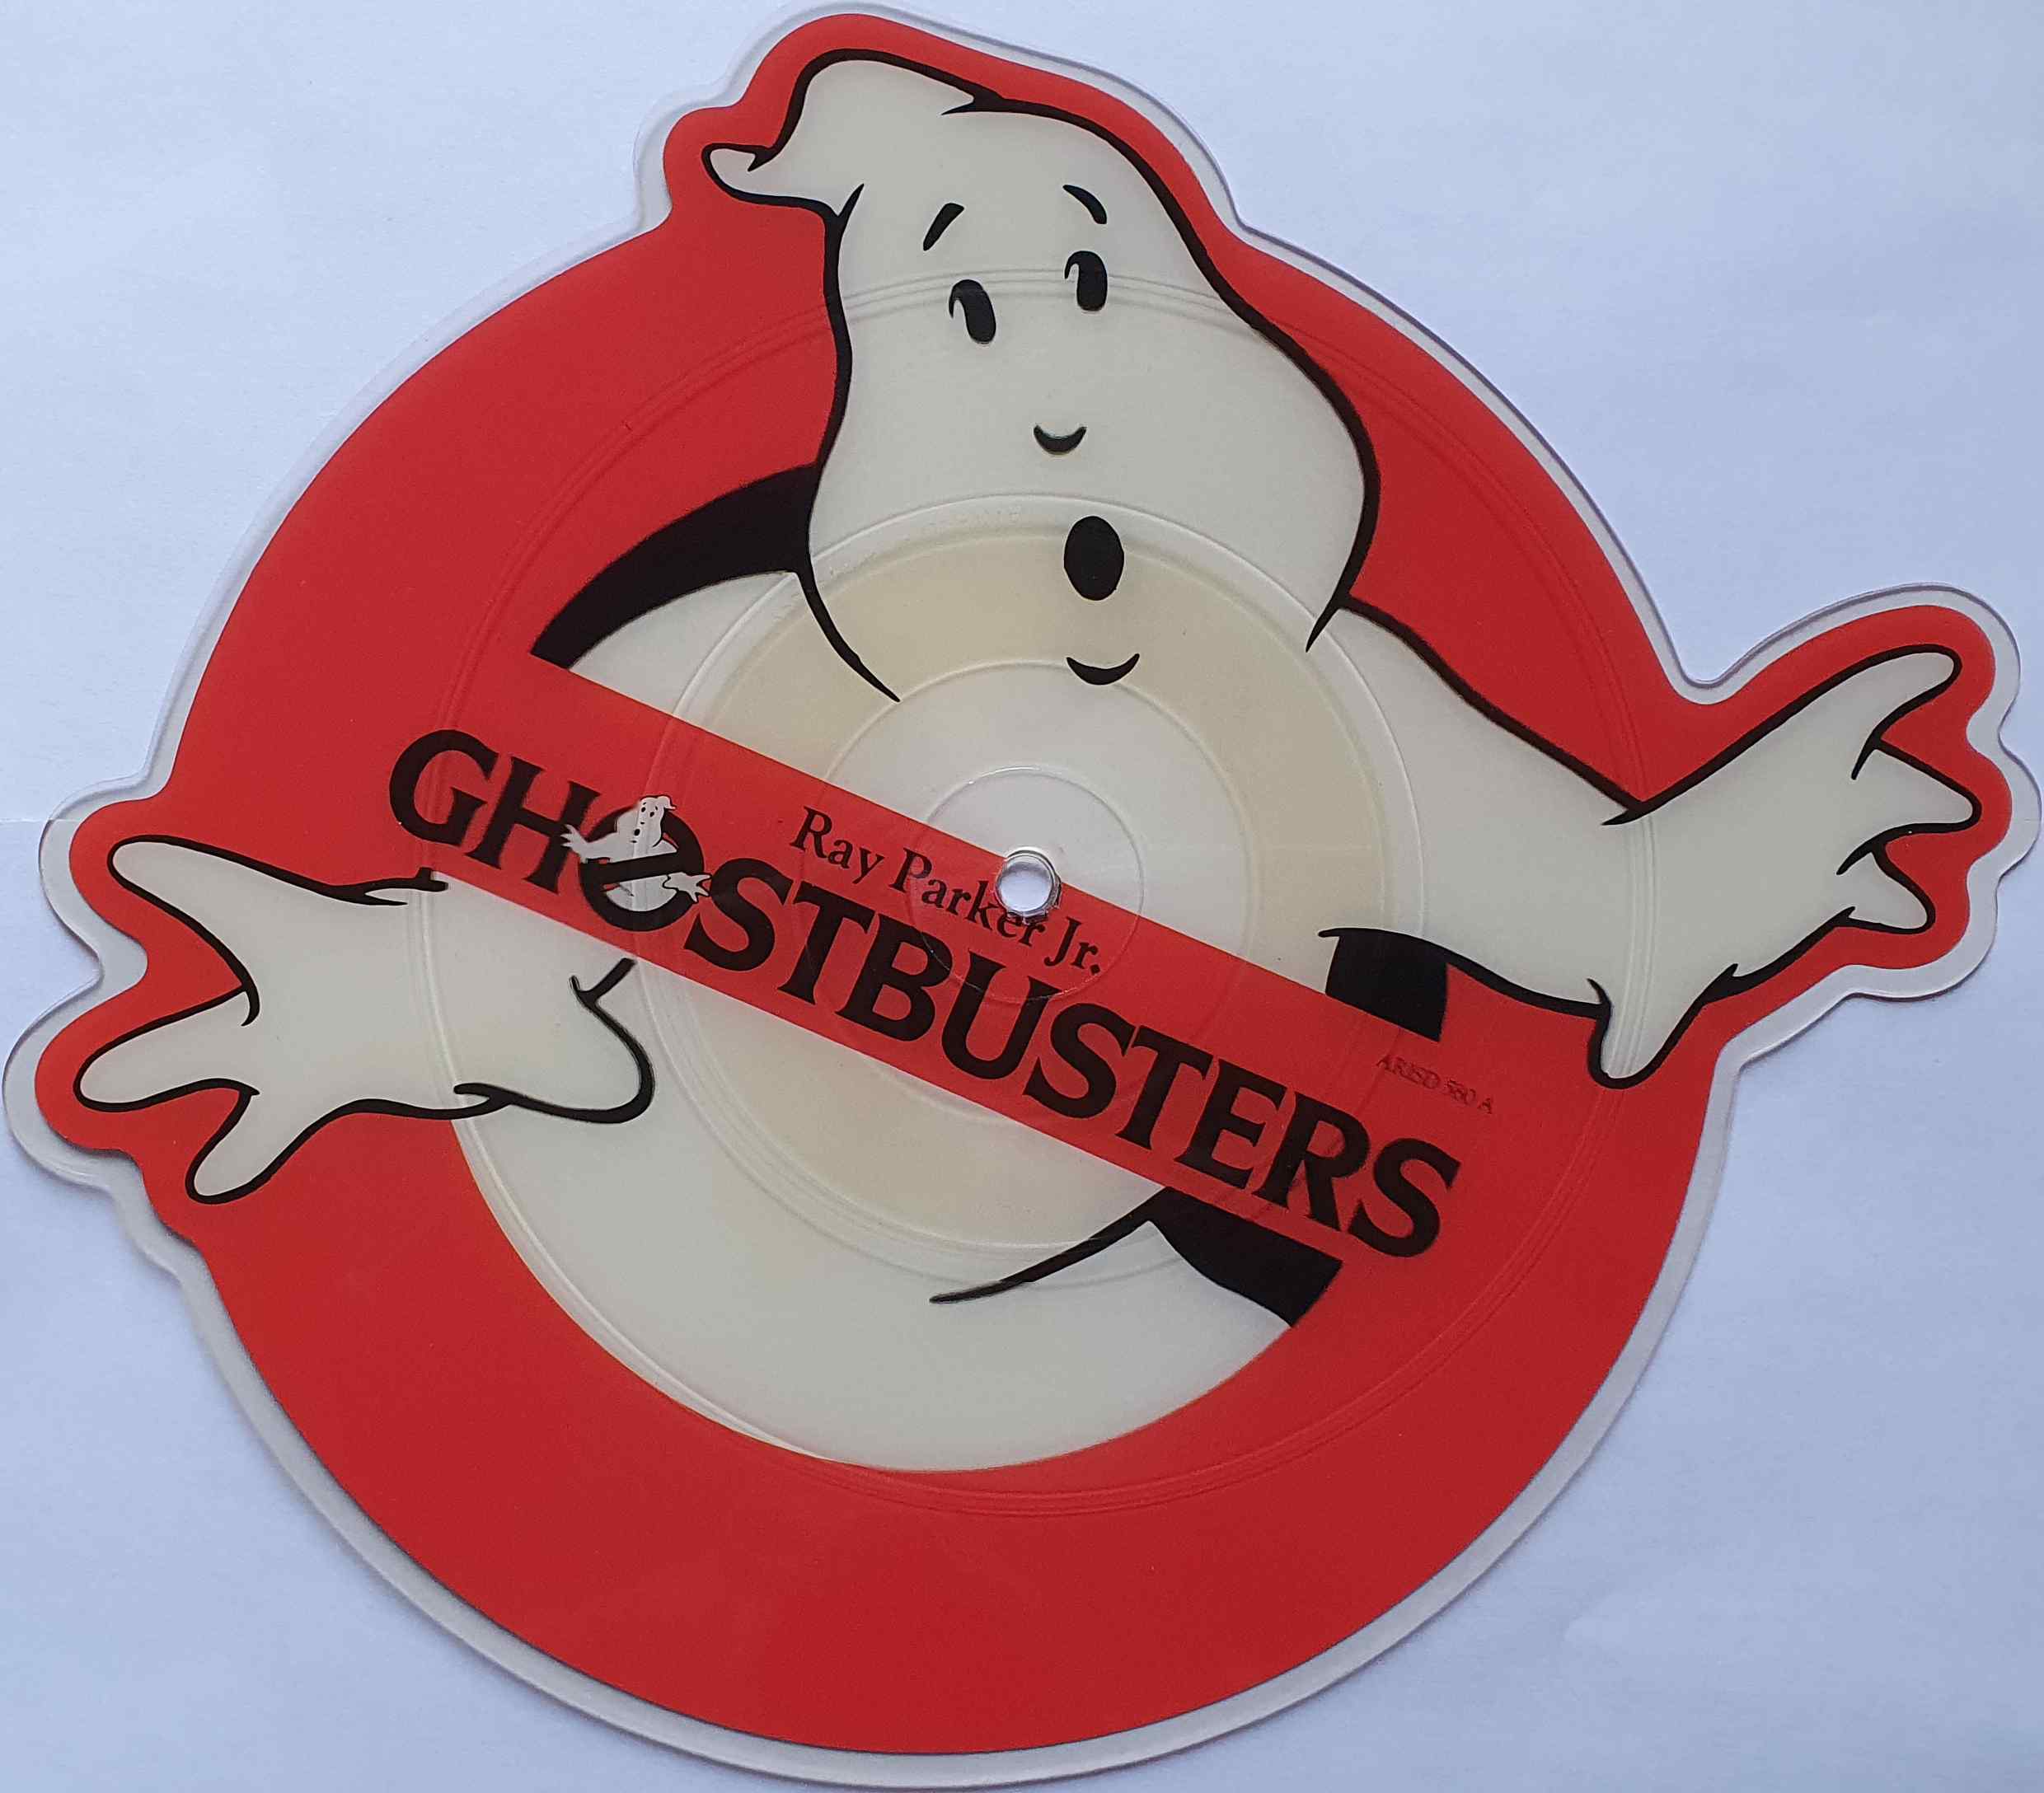 Picture of Ghostbusters by artist Ray Parker Junior from ITV, Channel 4 and Channel 5 singles library